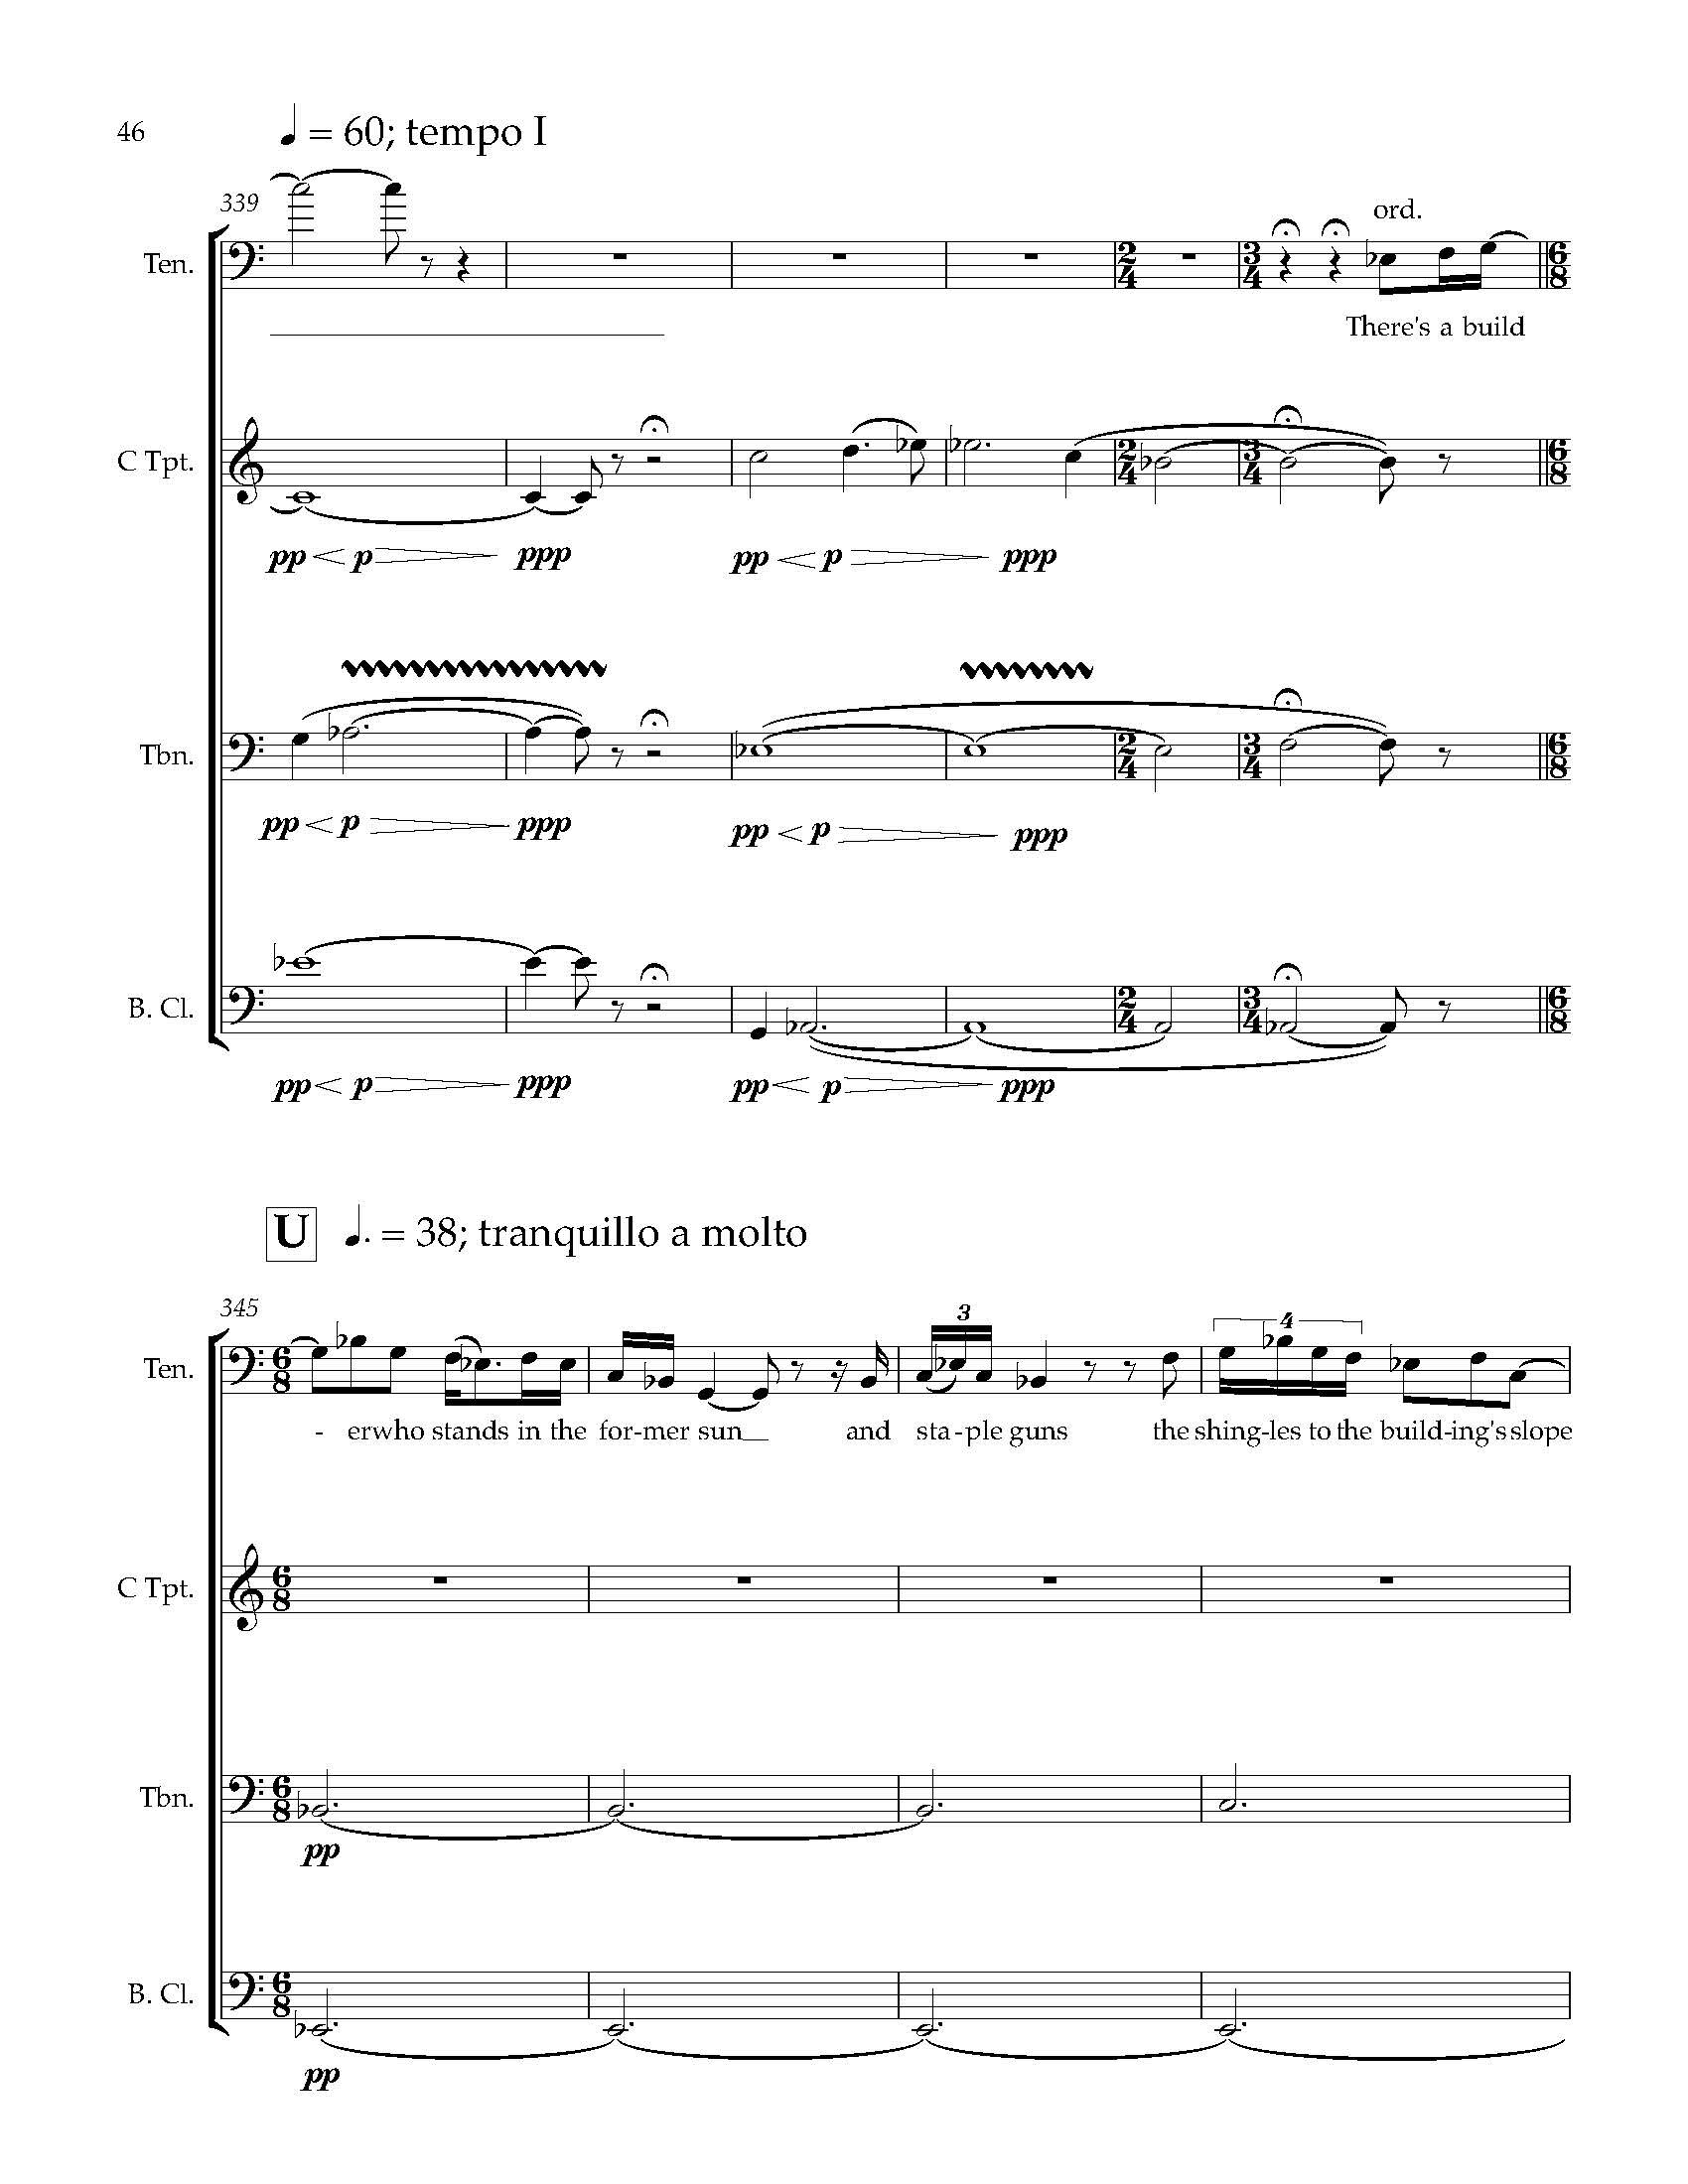 Many Worlds [1] - Complete Score_Page_55.jpg